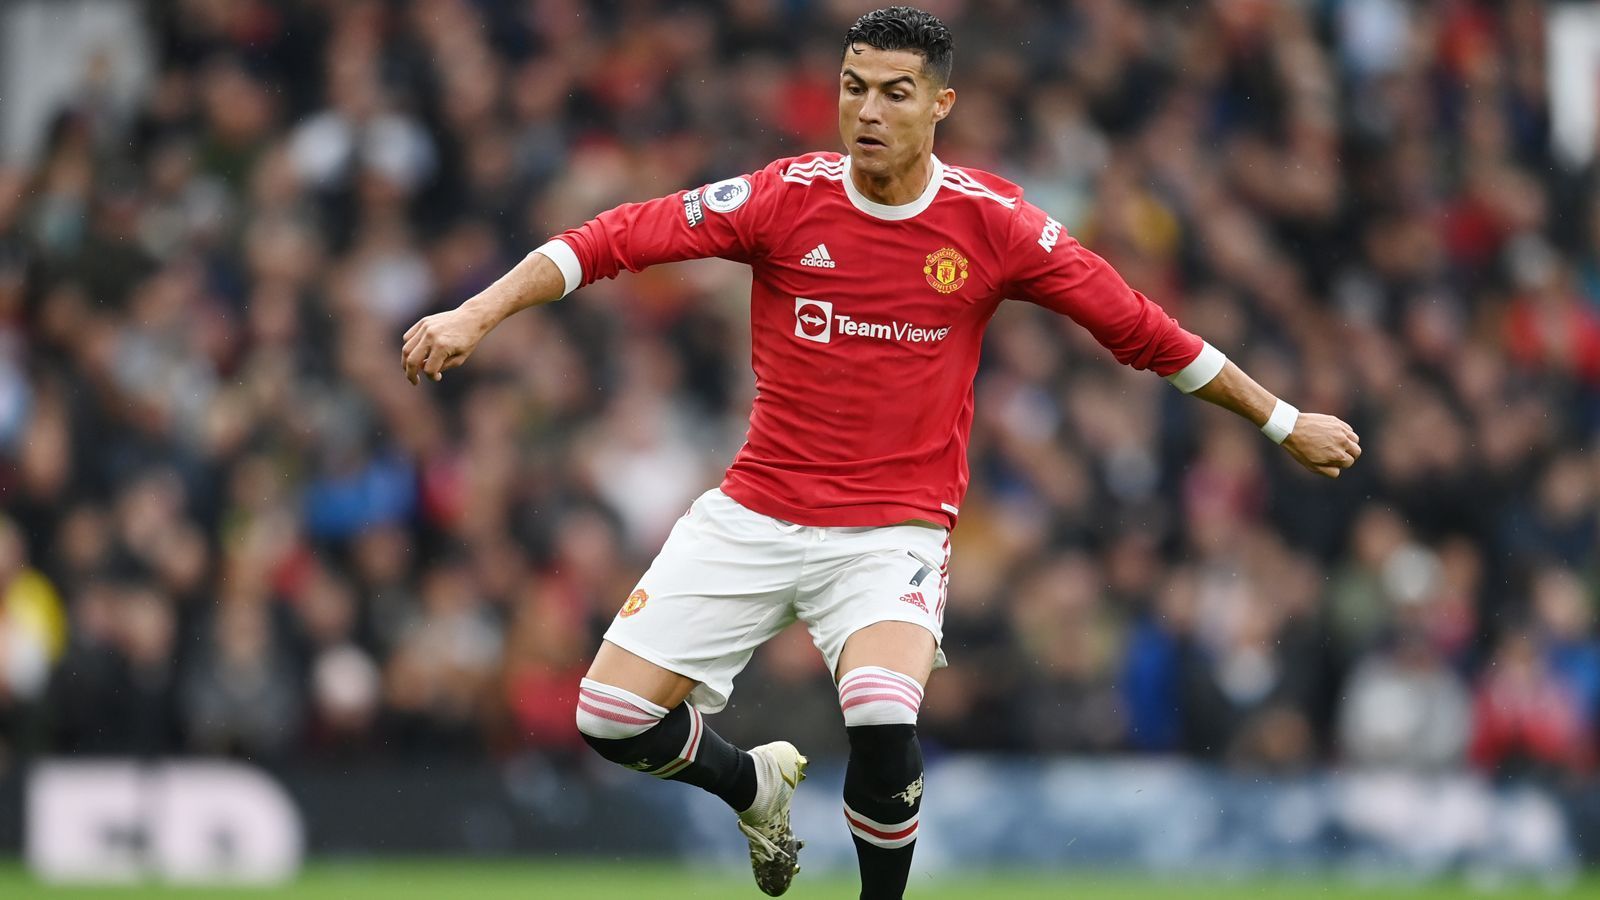 
                <strong>Cristiano Ronaldo (Manchester United)</strong><br>
                Position: Mittelstürmer - Alter: 36 Jahre -Nationalität: Portugal
              